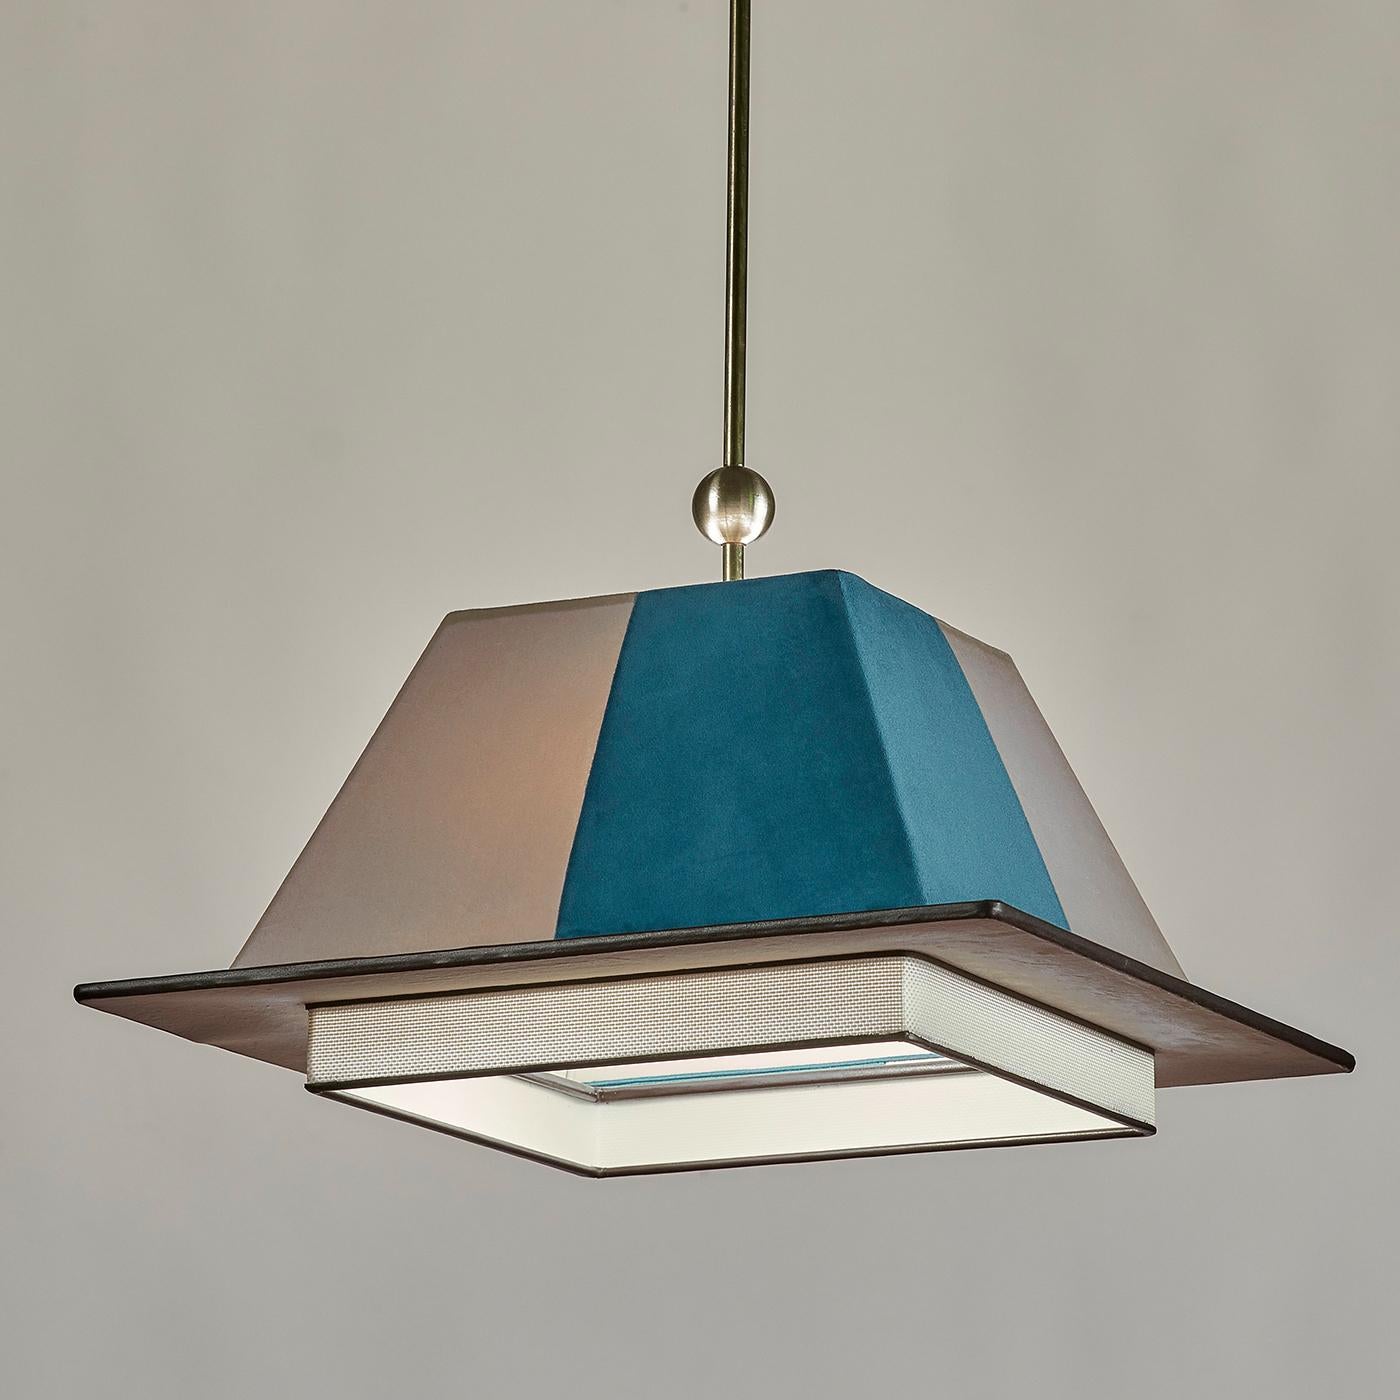 Part of the Chapeau Collection inspired by the shapes of hats, this sophisticated pendant light is reminiscent of the traditional graduation CAP. Pairing unconventional materials, this piece features a trapezoidal top in alternating ice blue and